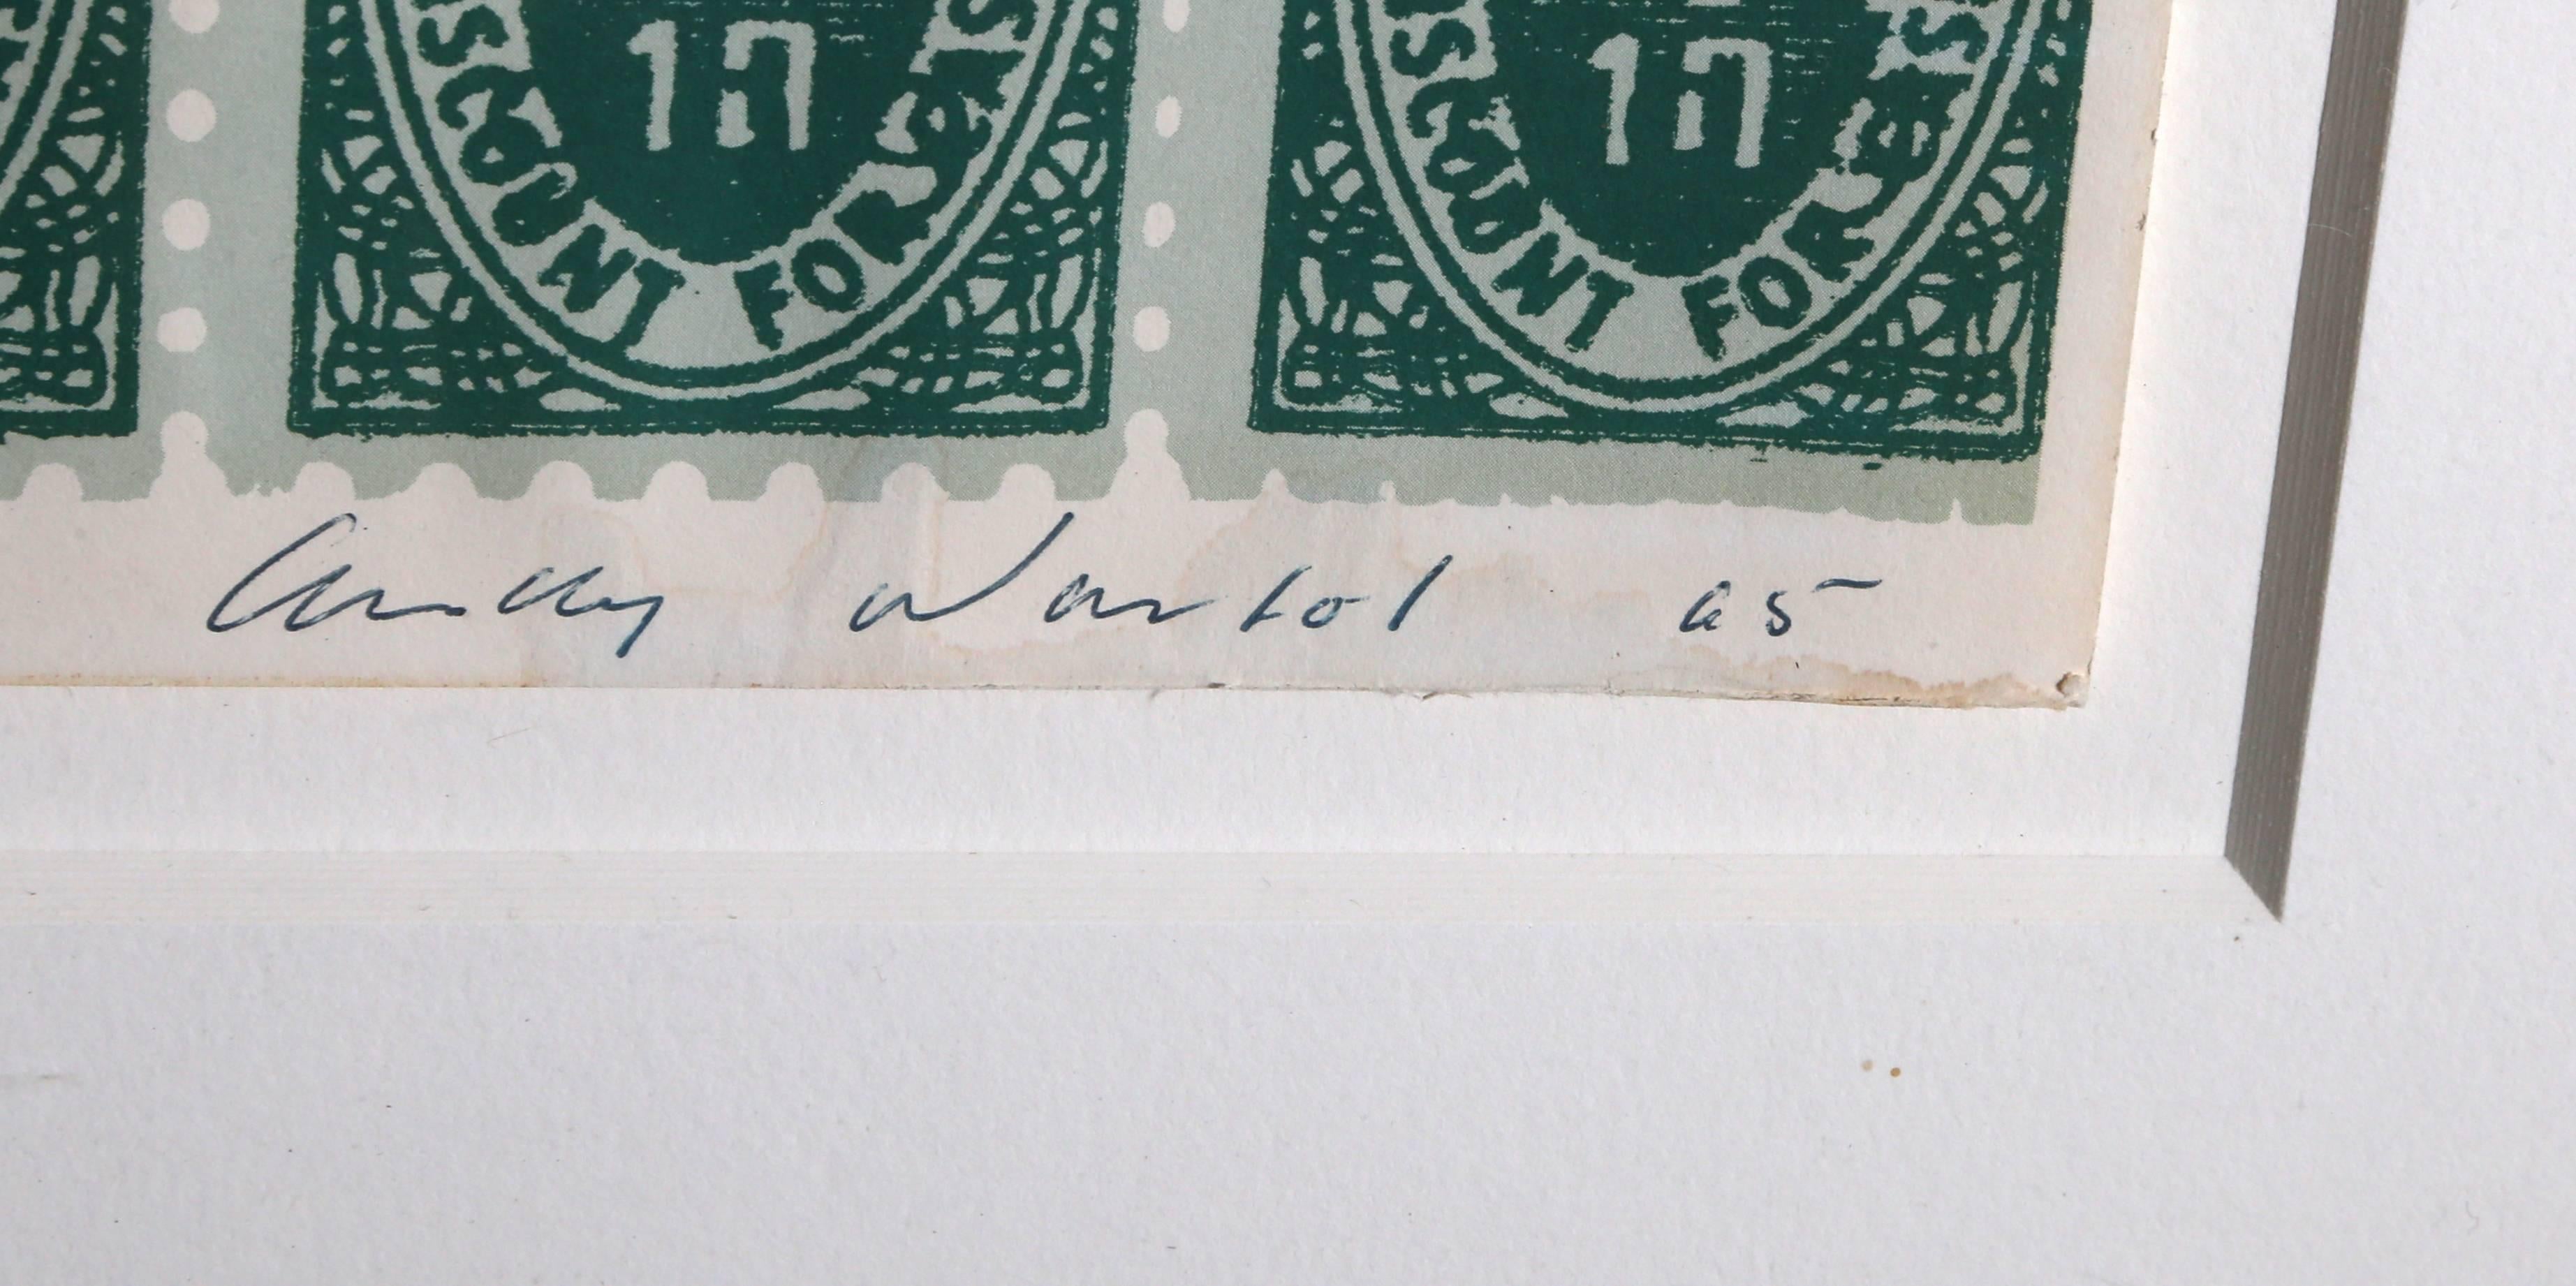 S&H Green Stamps (FS. II.9) - Print by Andy Warhol